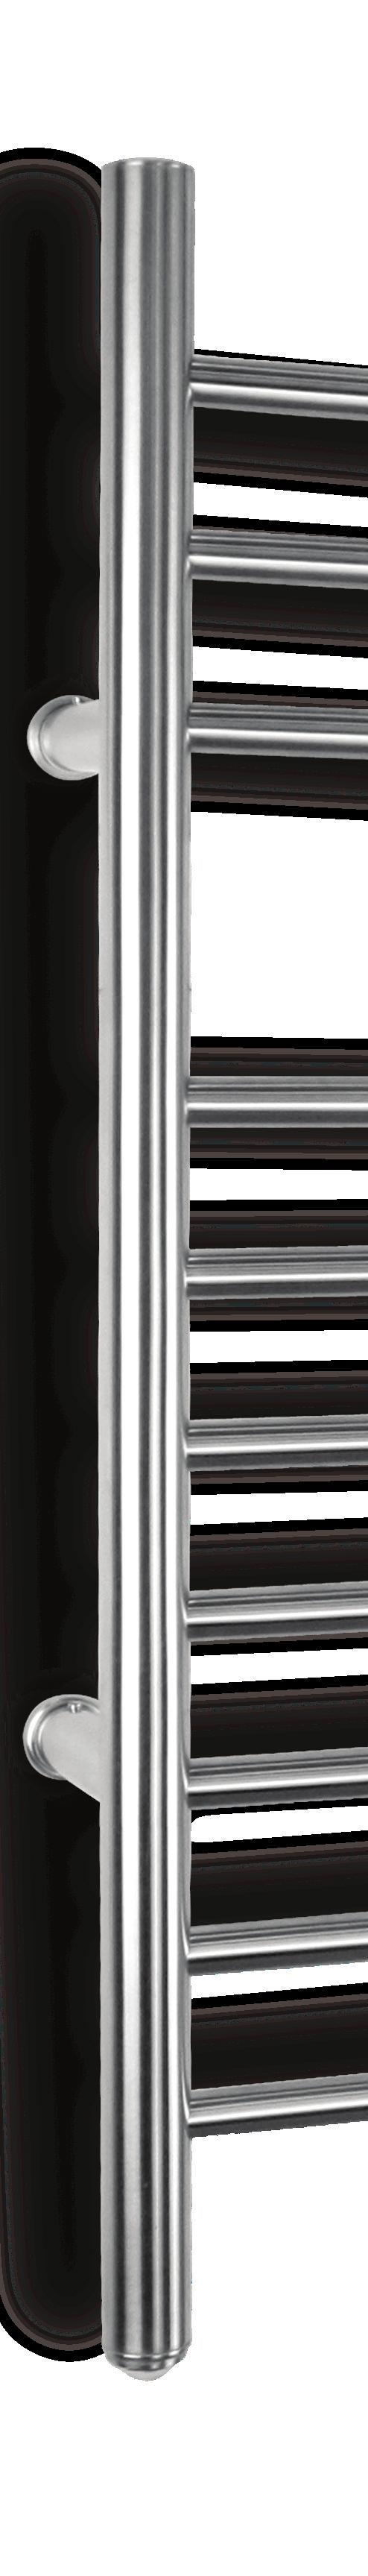 Beautiful, skillfully brushed stainless steel finish 10 sleek bars provide ample space